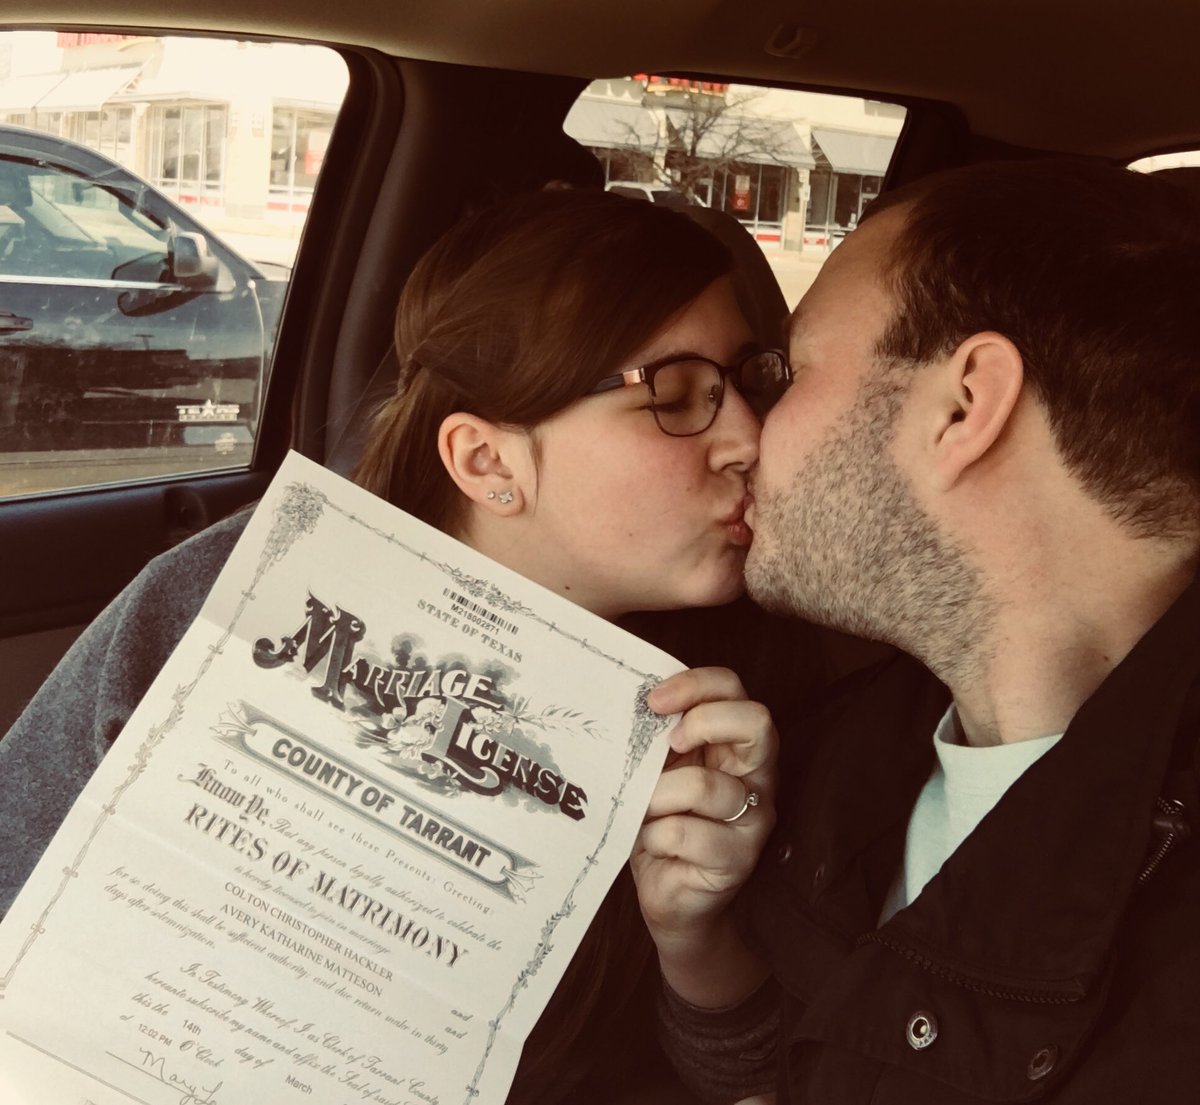 In 65 days I get to marry the love of my life, today made it more official. Best birthday present ever 💛 #birthday #marriagelicense #happilyeverhackler